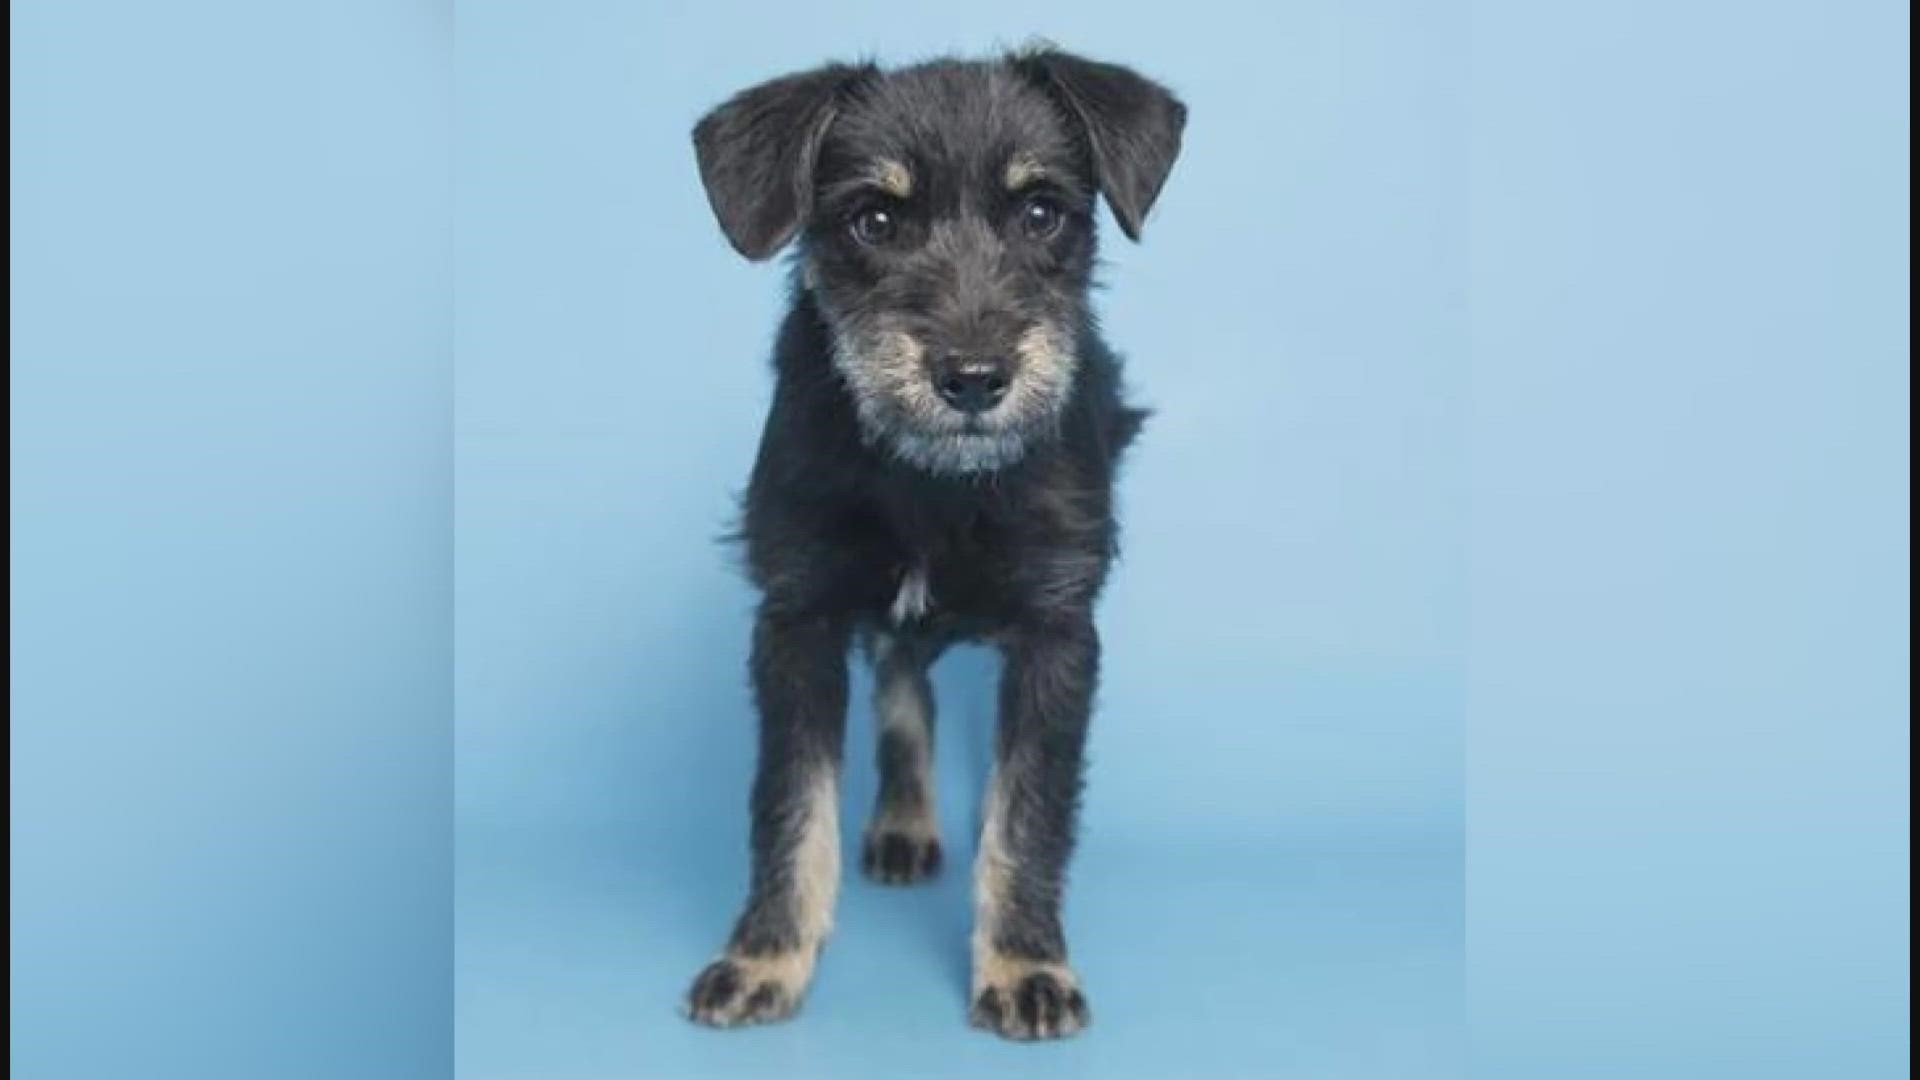 Gracie, the 14-week-old Parson Russell Terrier, is available for adoption at Arizona Humane Society's South Mountain Campus.